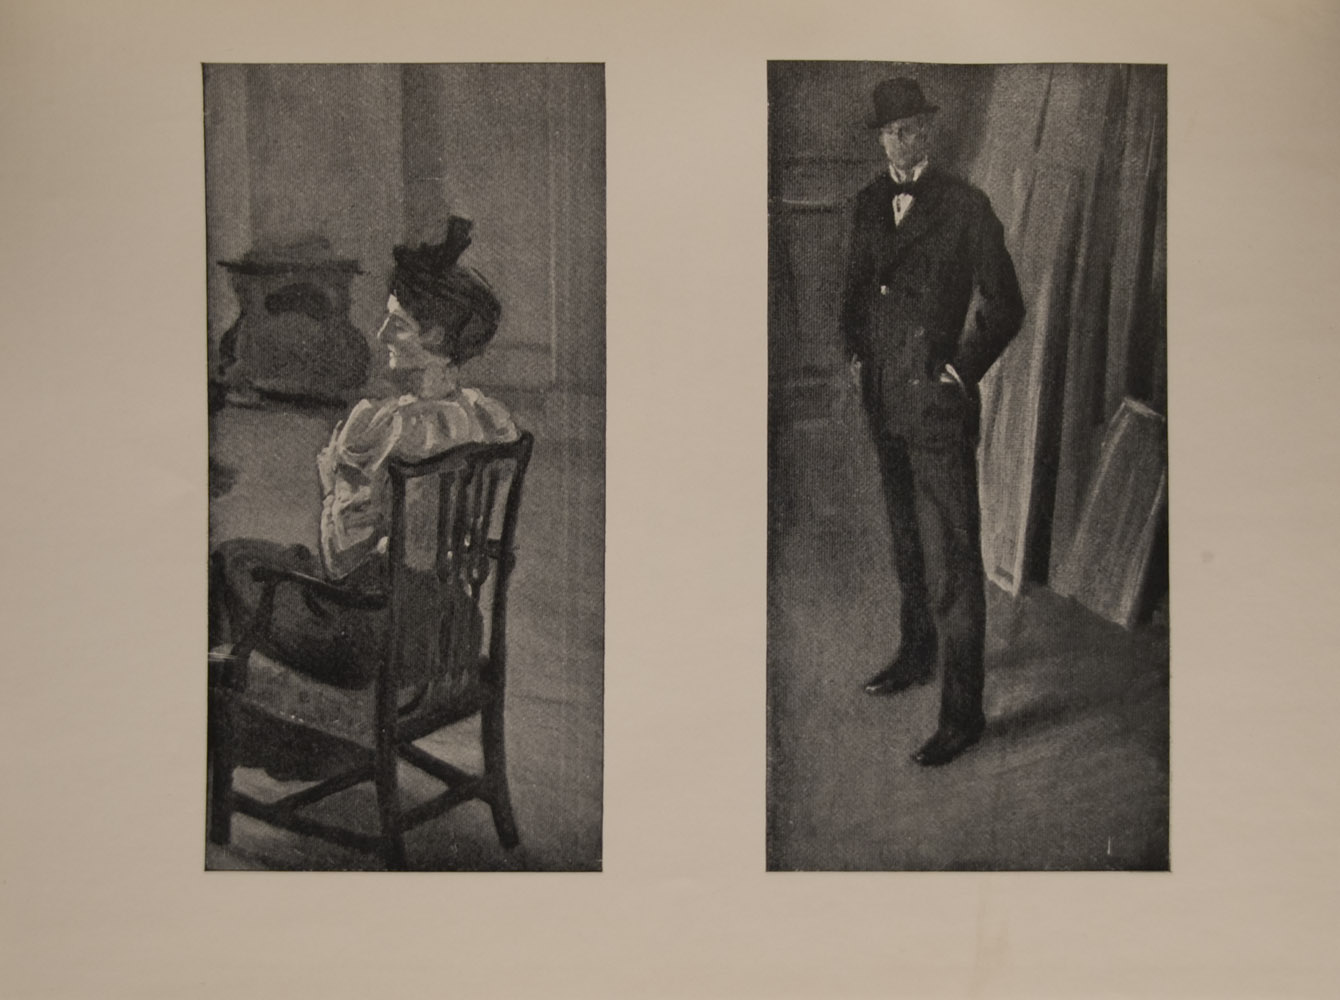 he image is of a mature woman seated in a chair her back to the viewer but with head in profile She wears a hat a white blouse and a dark skirt The scene is in an interior room there is a stove in the background The image is displayed horizontally